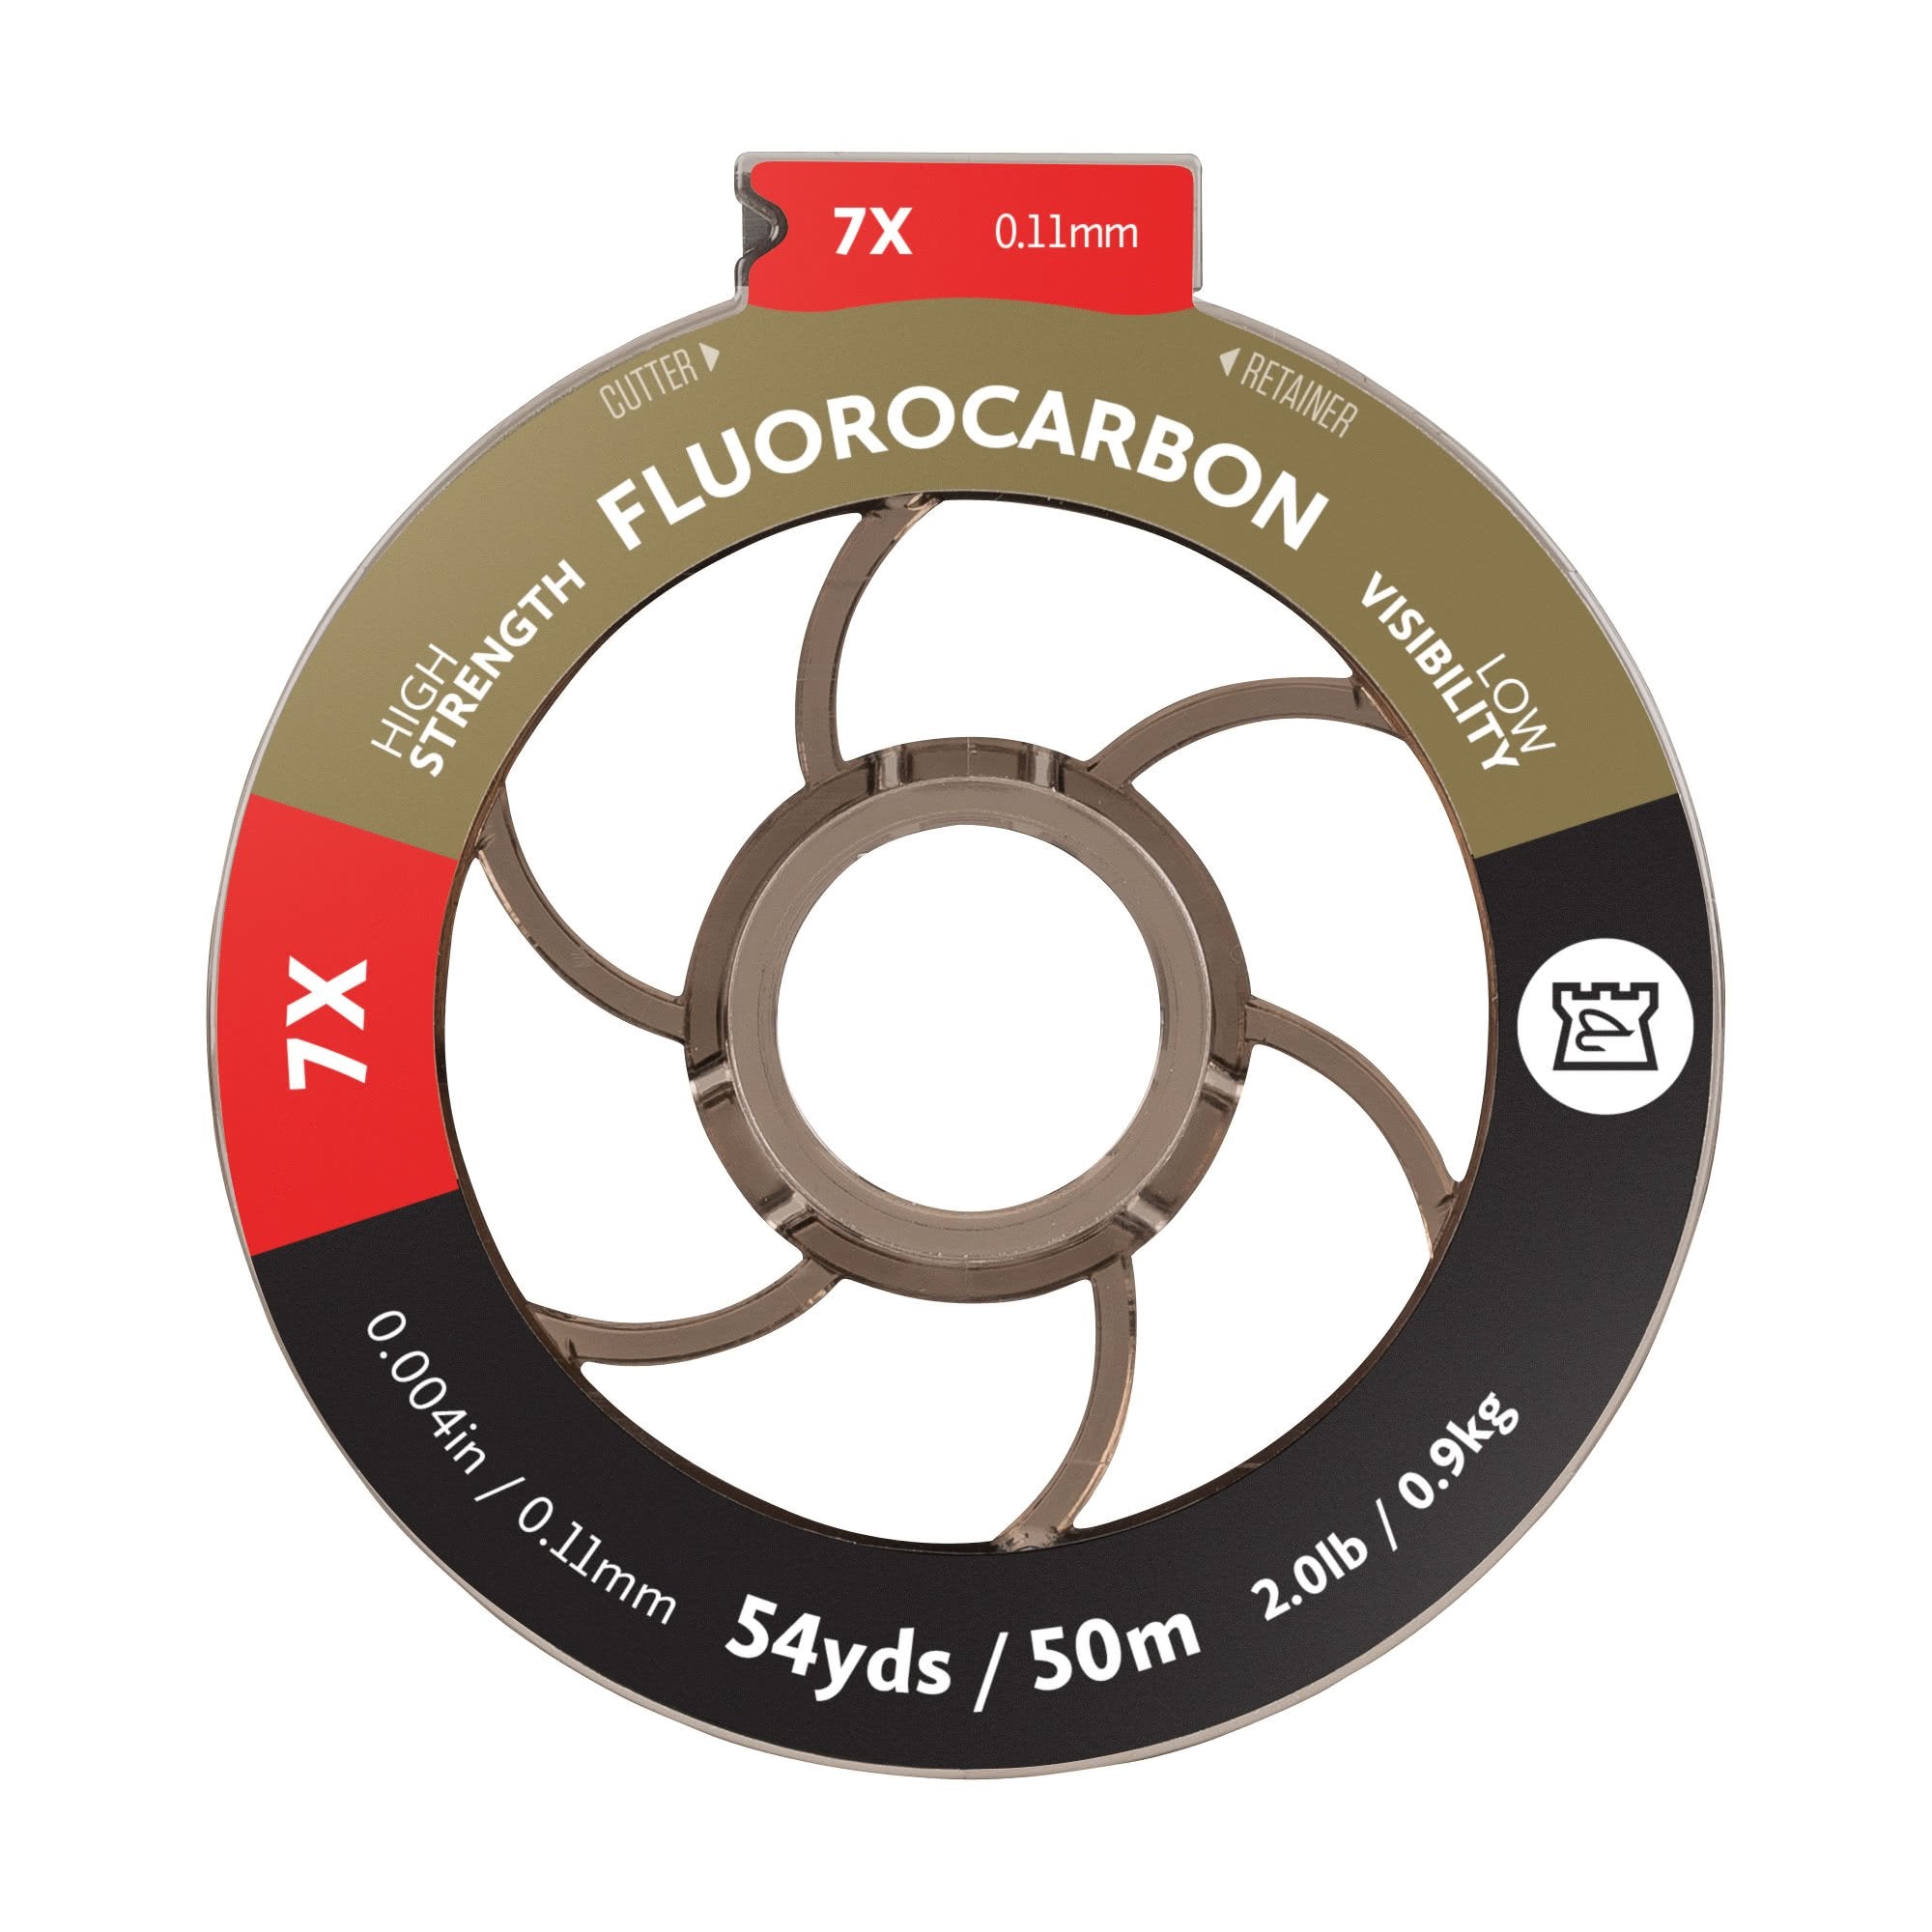 Trouthunter Fluorocarbon Fly Fishing Tippet - 50M spool - basin + bend